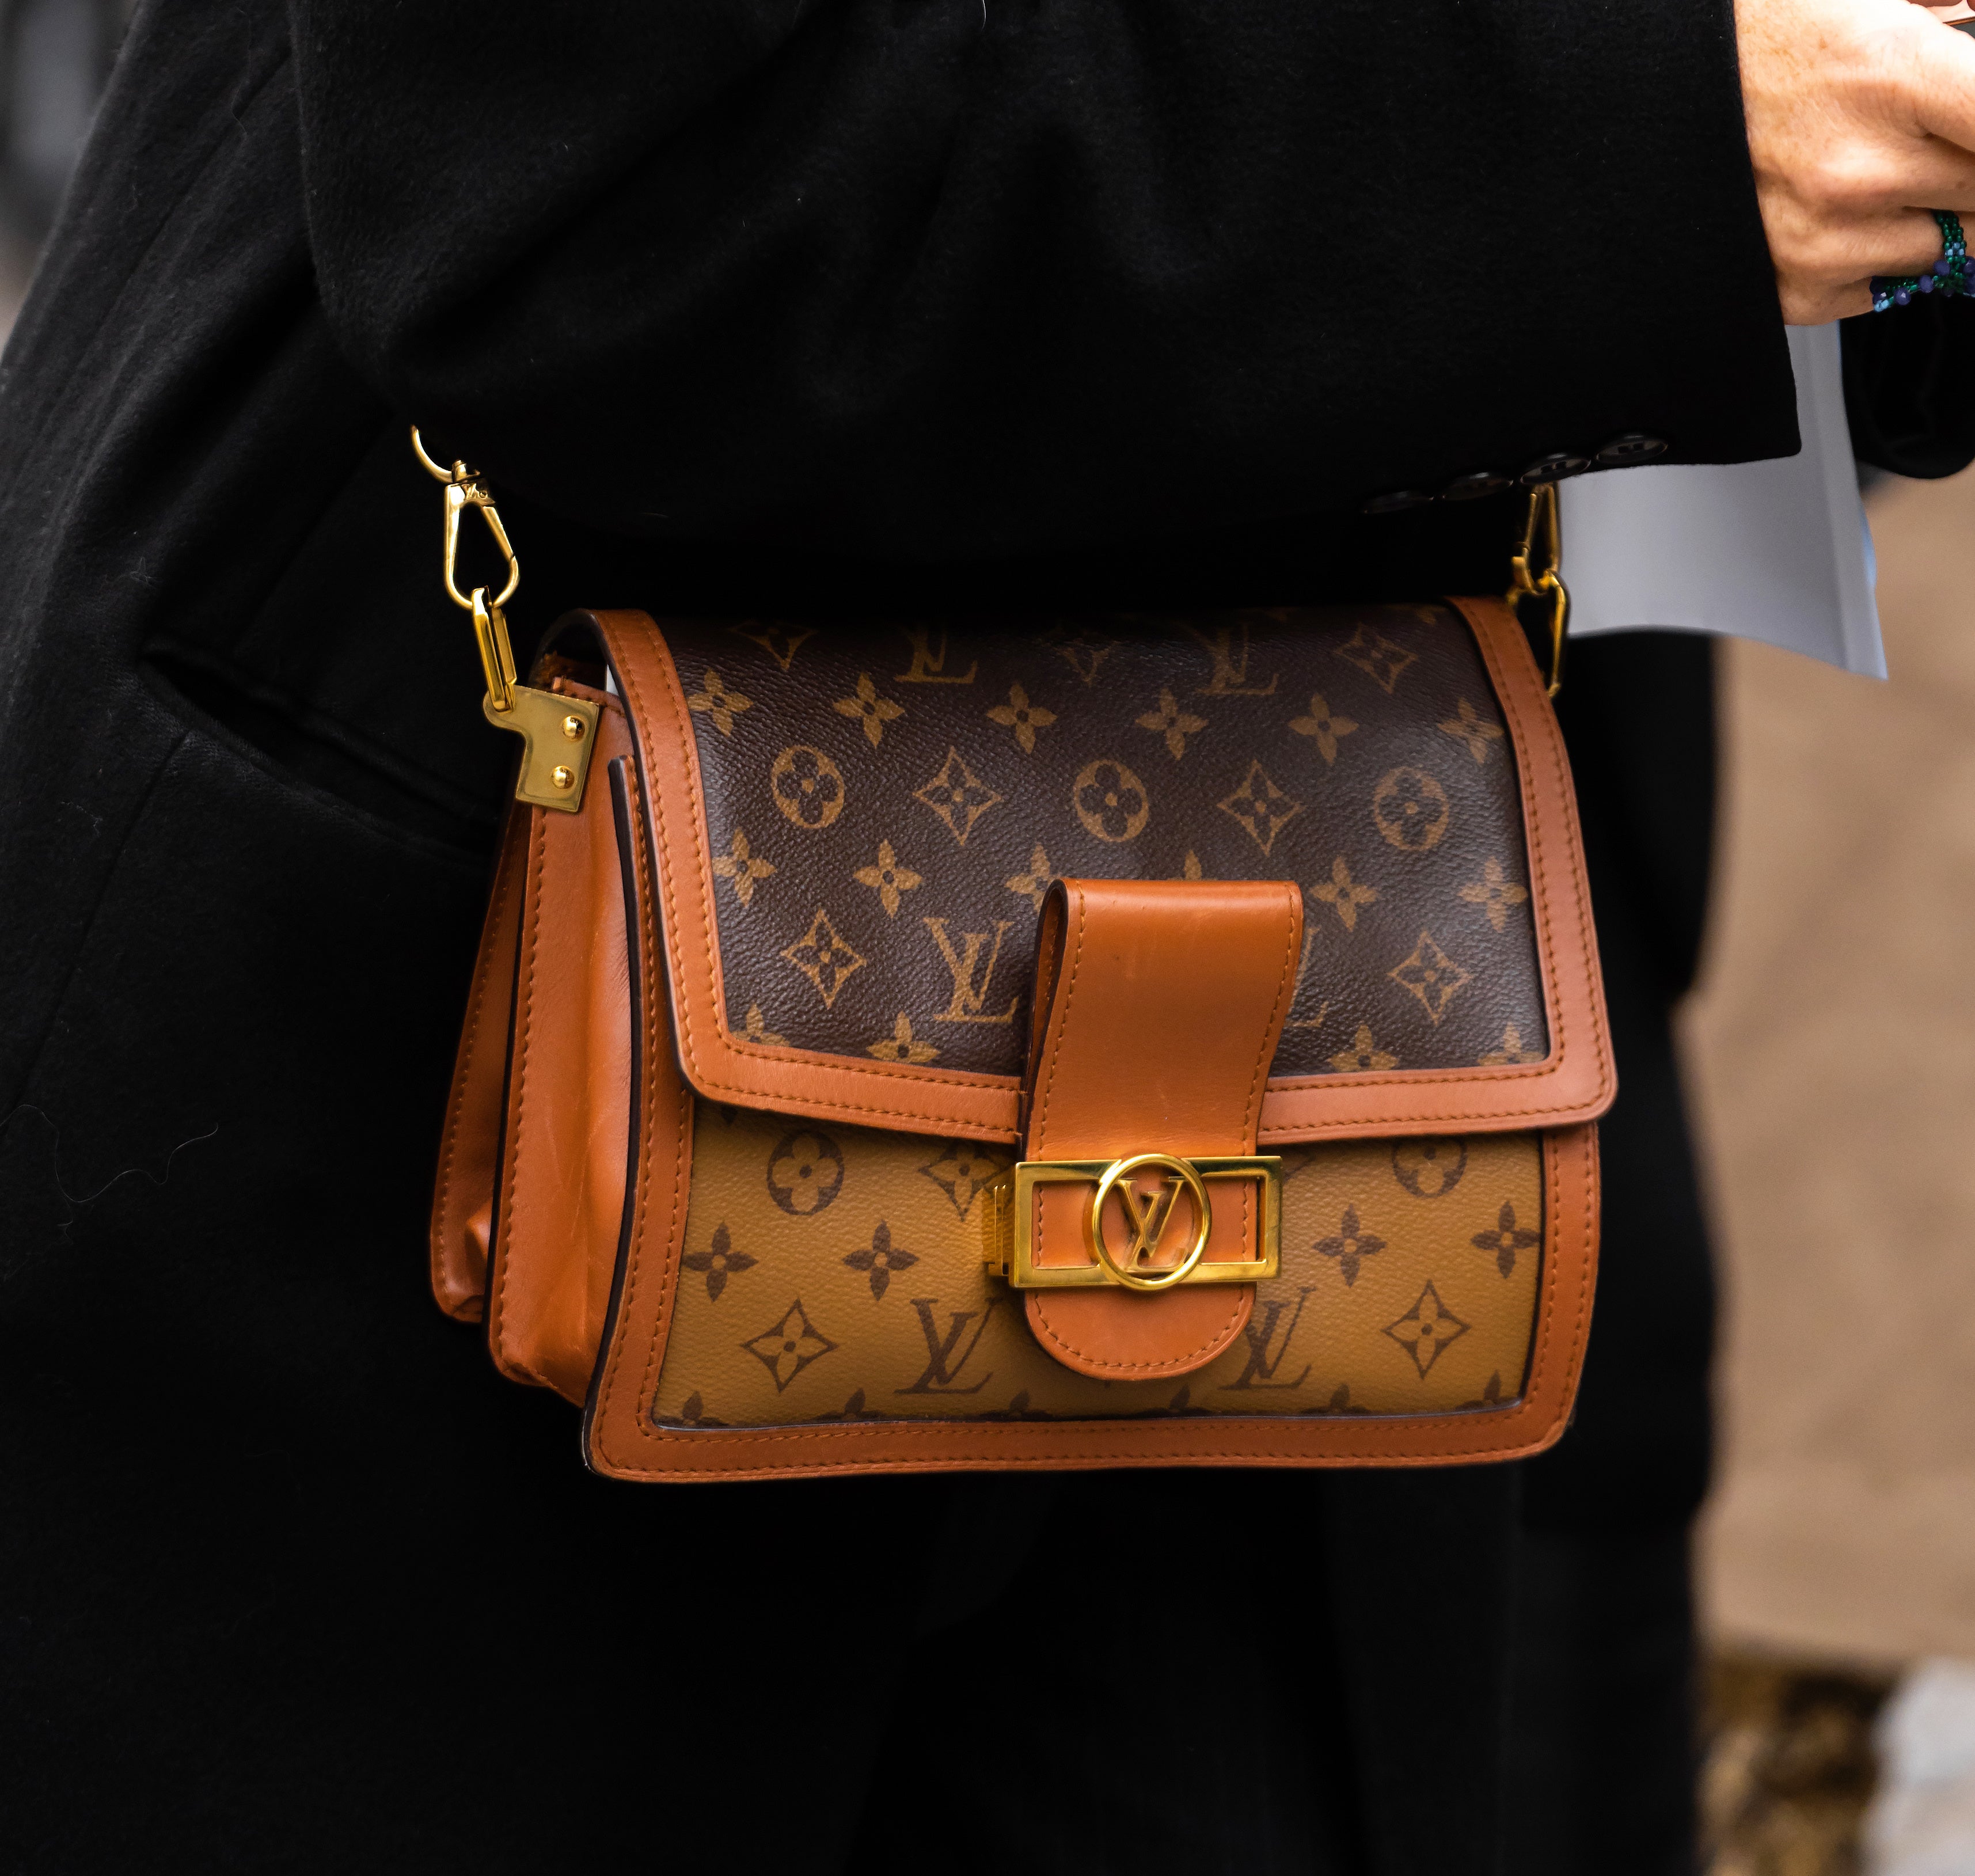 Which Louis Vuitton handbags are counterfeited the most? - Quora